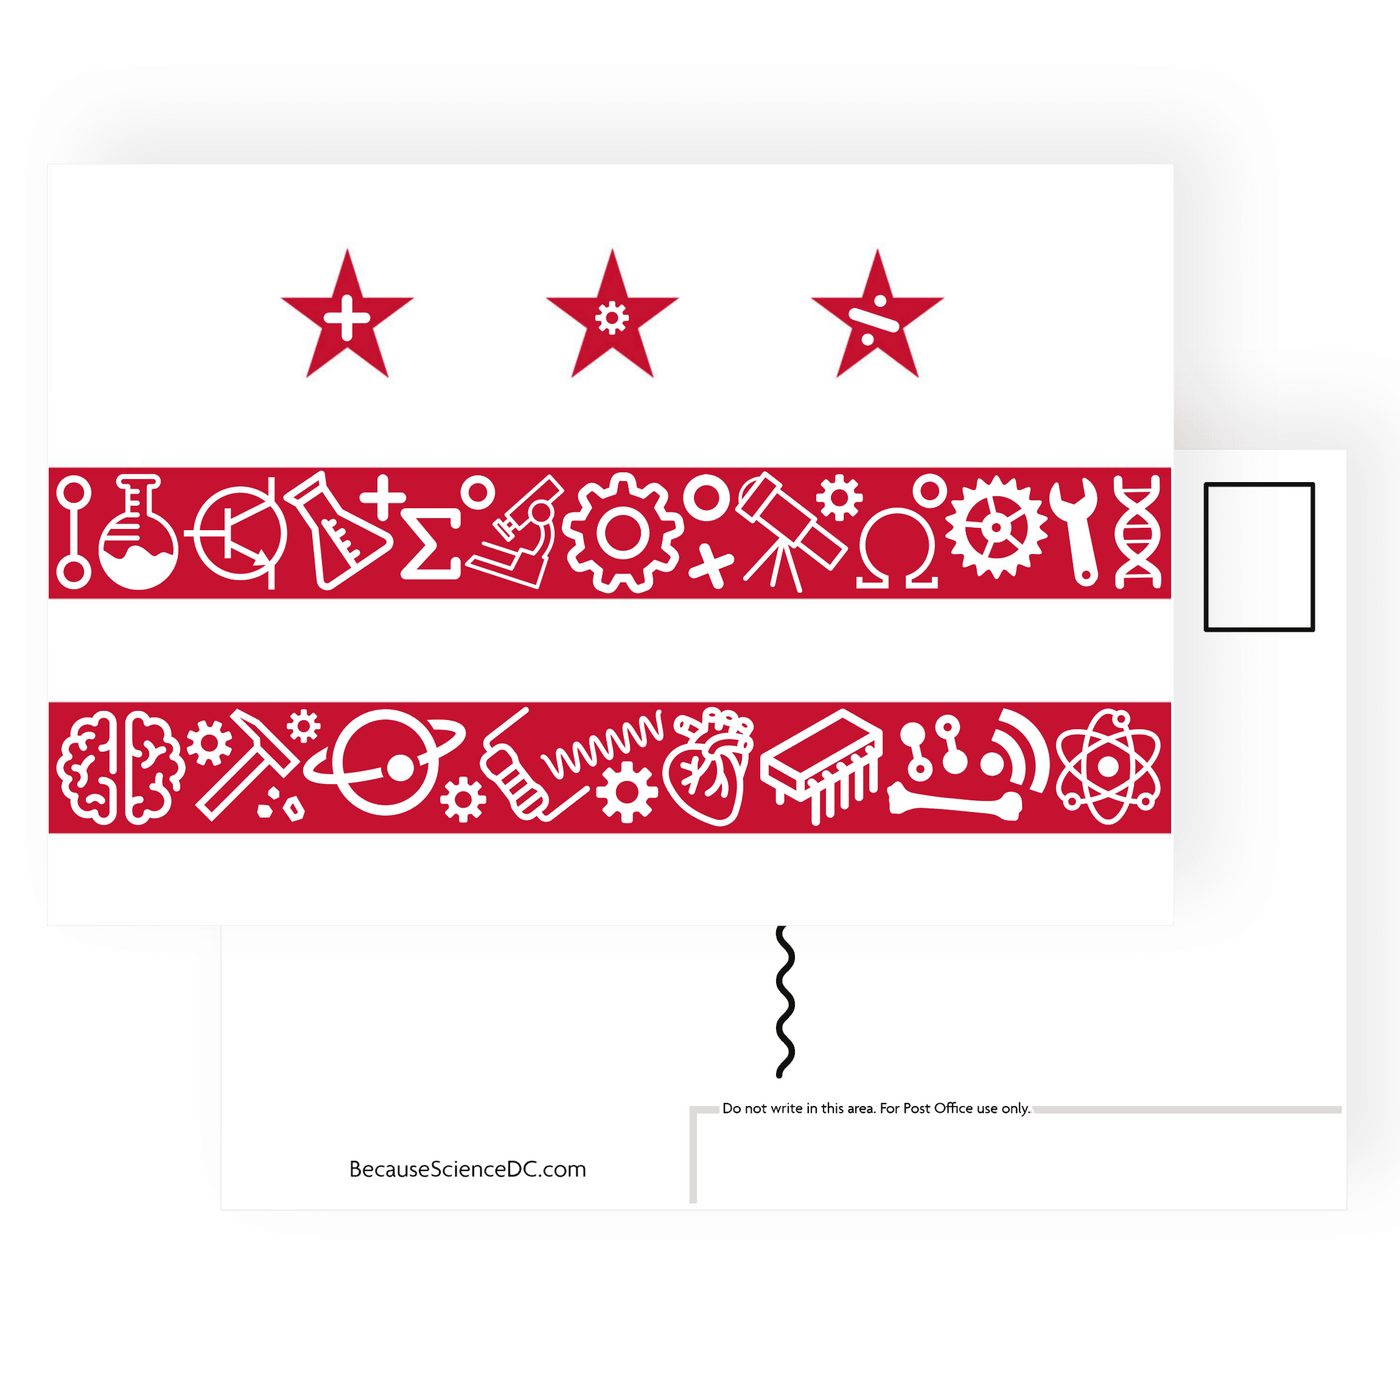 postcard of the DC flag made of red science symbols